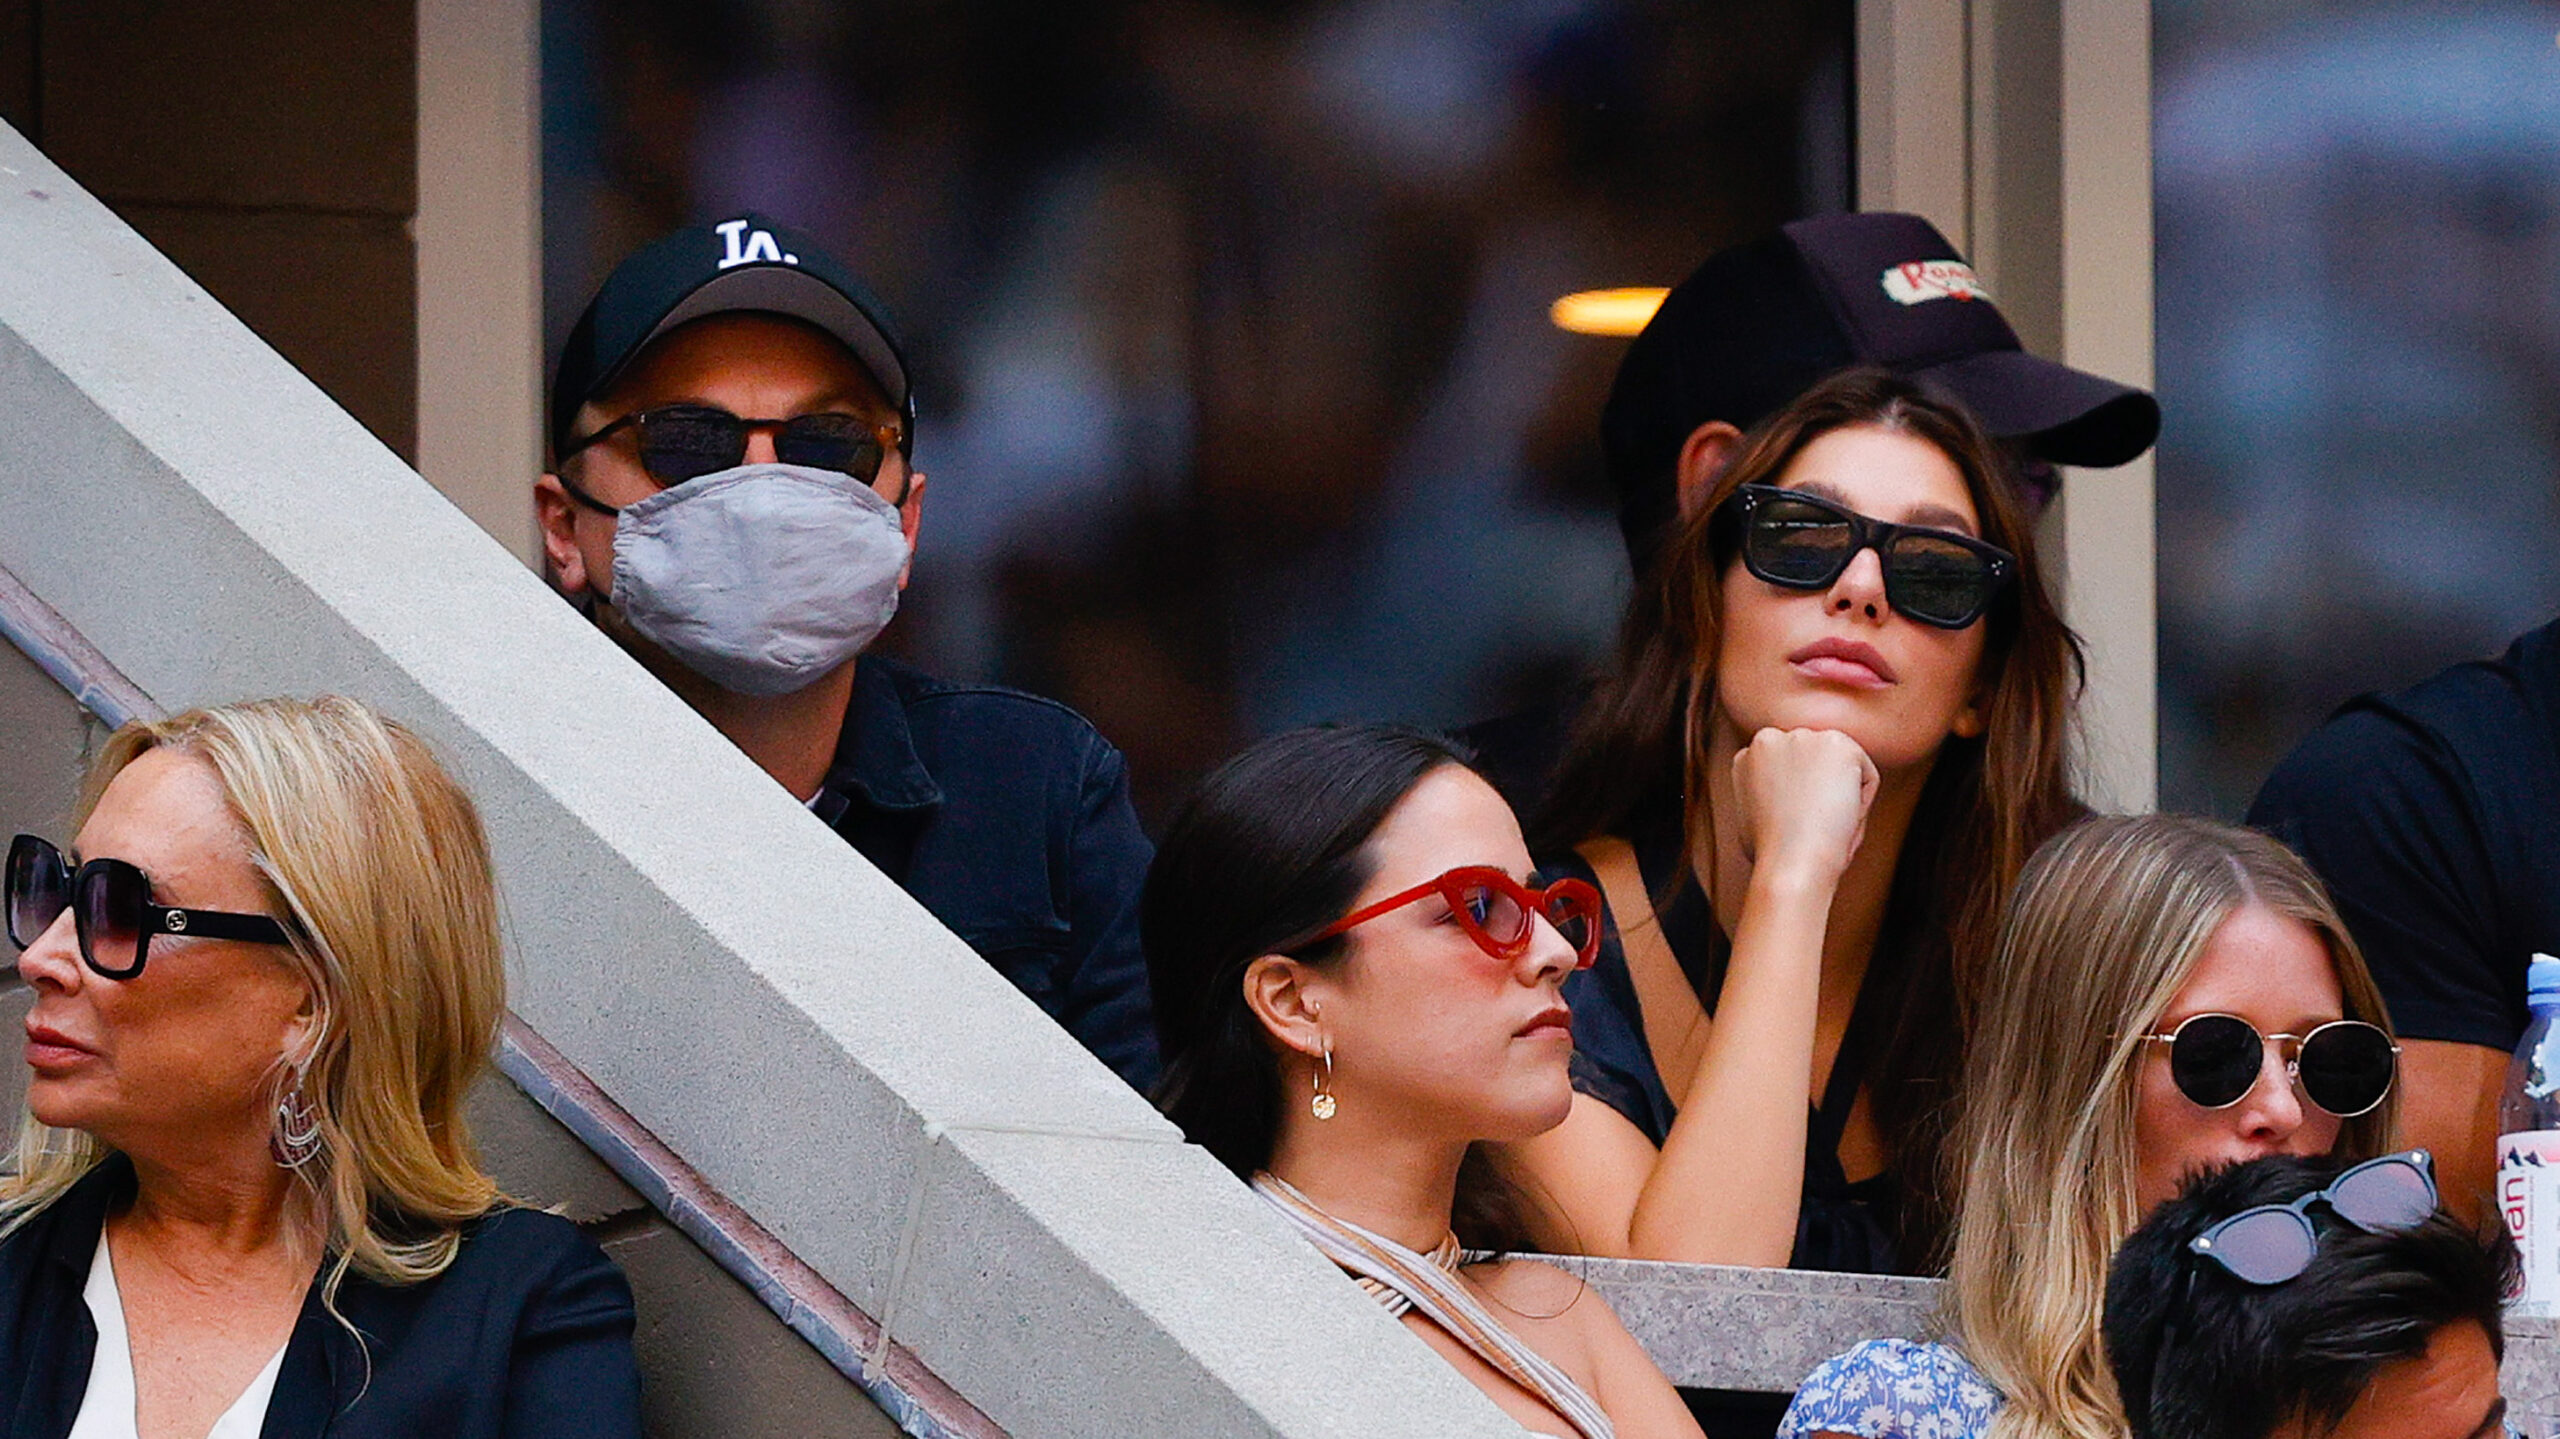 Actor Leonardo DiCaprio and his girlfriend, model/actress, Camila Morrone watch the Men's Singles final match between Daniil Medvedev of Russia and Novak Djokovic of Serbia on Day Fourteen of the 2021 US Open at the USTA Billie Jean King National Tennis Center on September 12, 2021 in the Flushing neighborhood of the Queens borough of New York City.